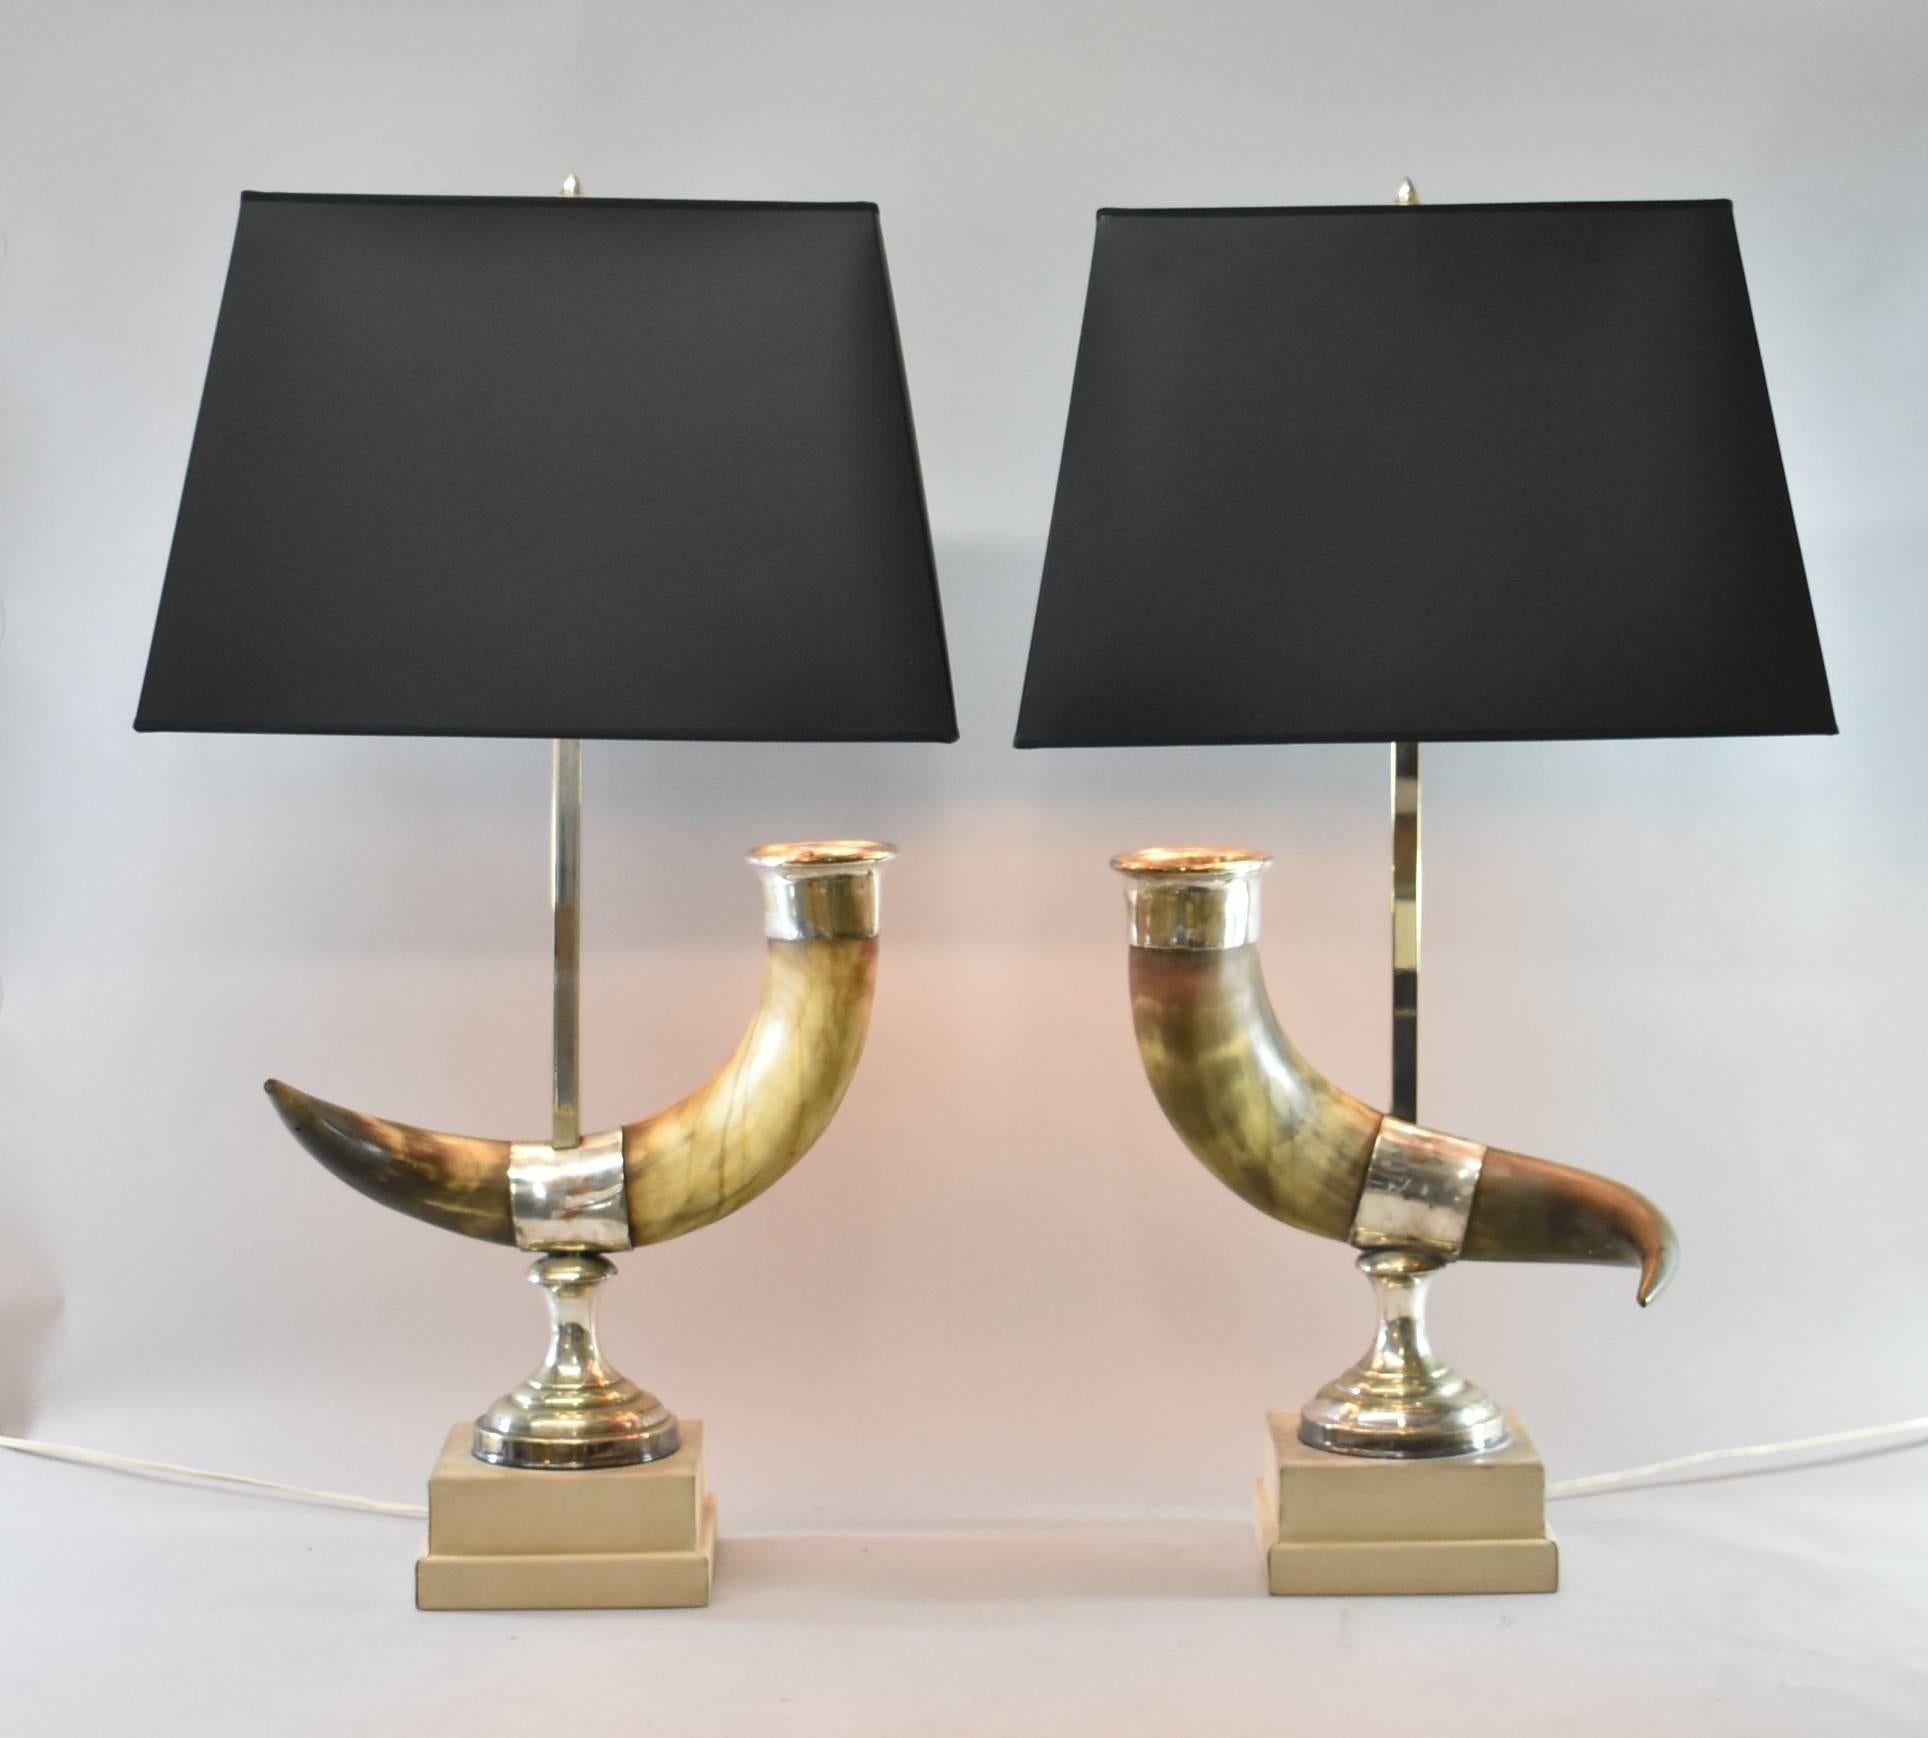 A unique pair of long horn steer table lamps.  These awesome lamps feature a chrome base with a leather wrapped bottom and 3 sockets.  The horns are cast from natural steer long horns.  Unusual, they will be a perfect match for your rustic decor. 